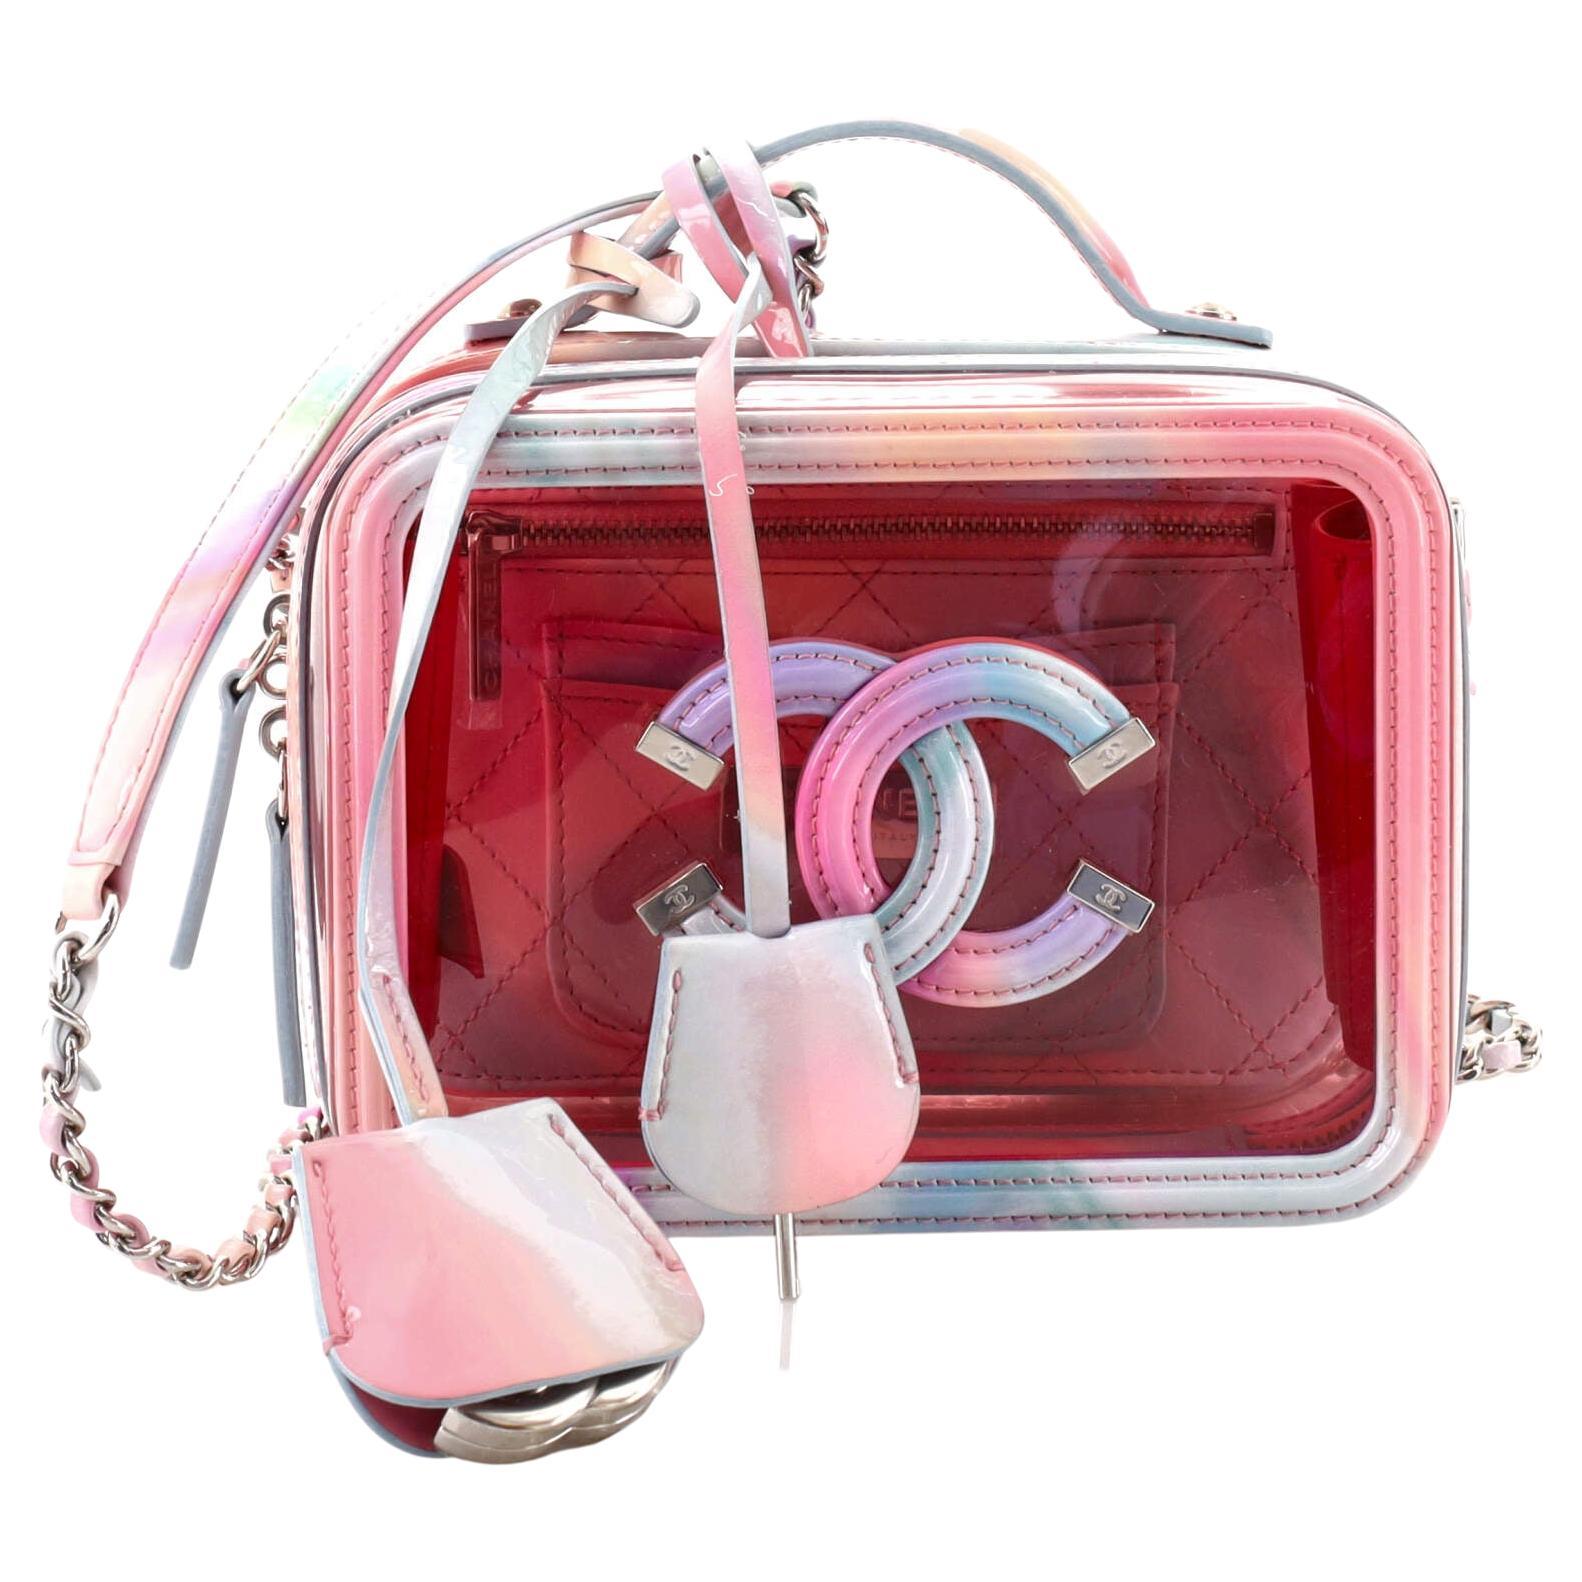 Sold at Auction: CHANEL Pink Lambskin Vanity Case Crossbody Bag